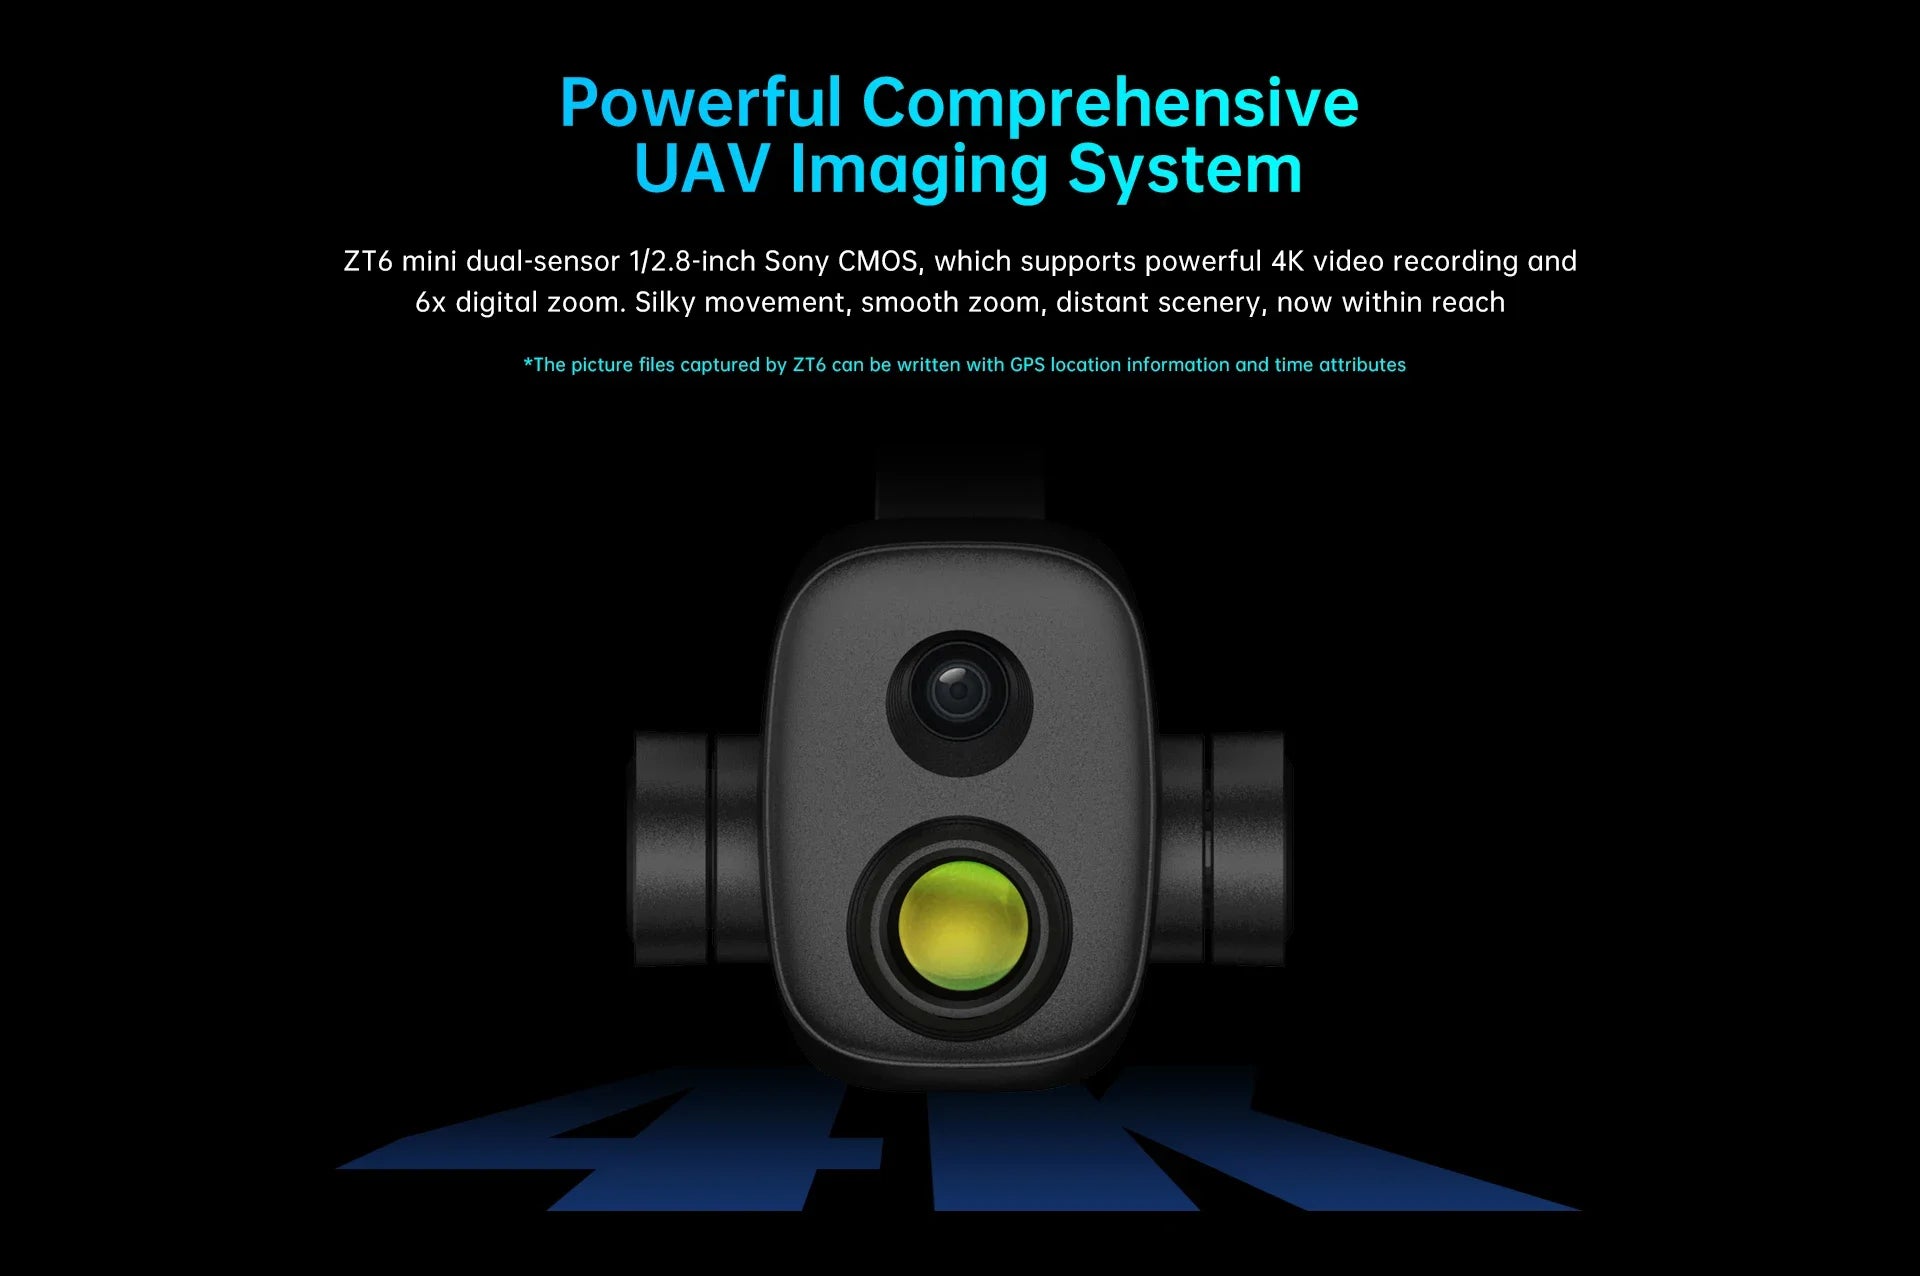 SIYI ZT6 Mini Dual Sensor Optical Pod, Compact dual-sensor system for 4K video recording with Sony CMOS camera, digital zoom, and GPS geotagging.